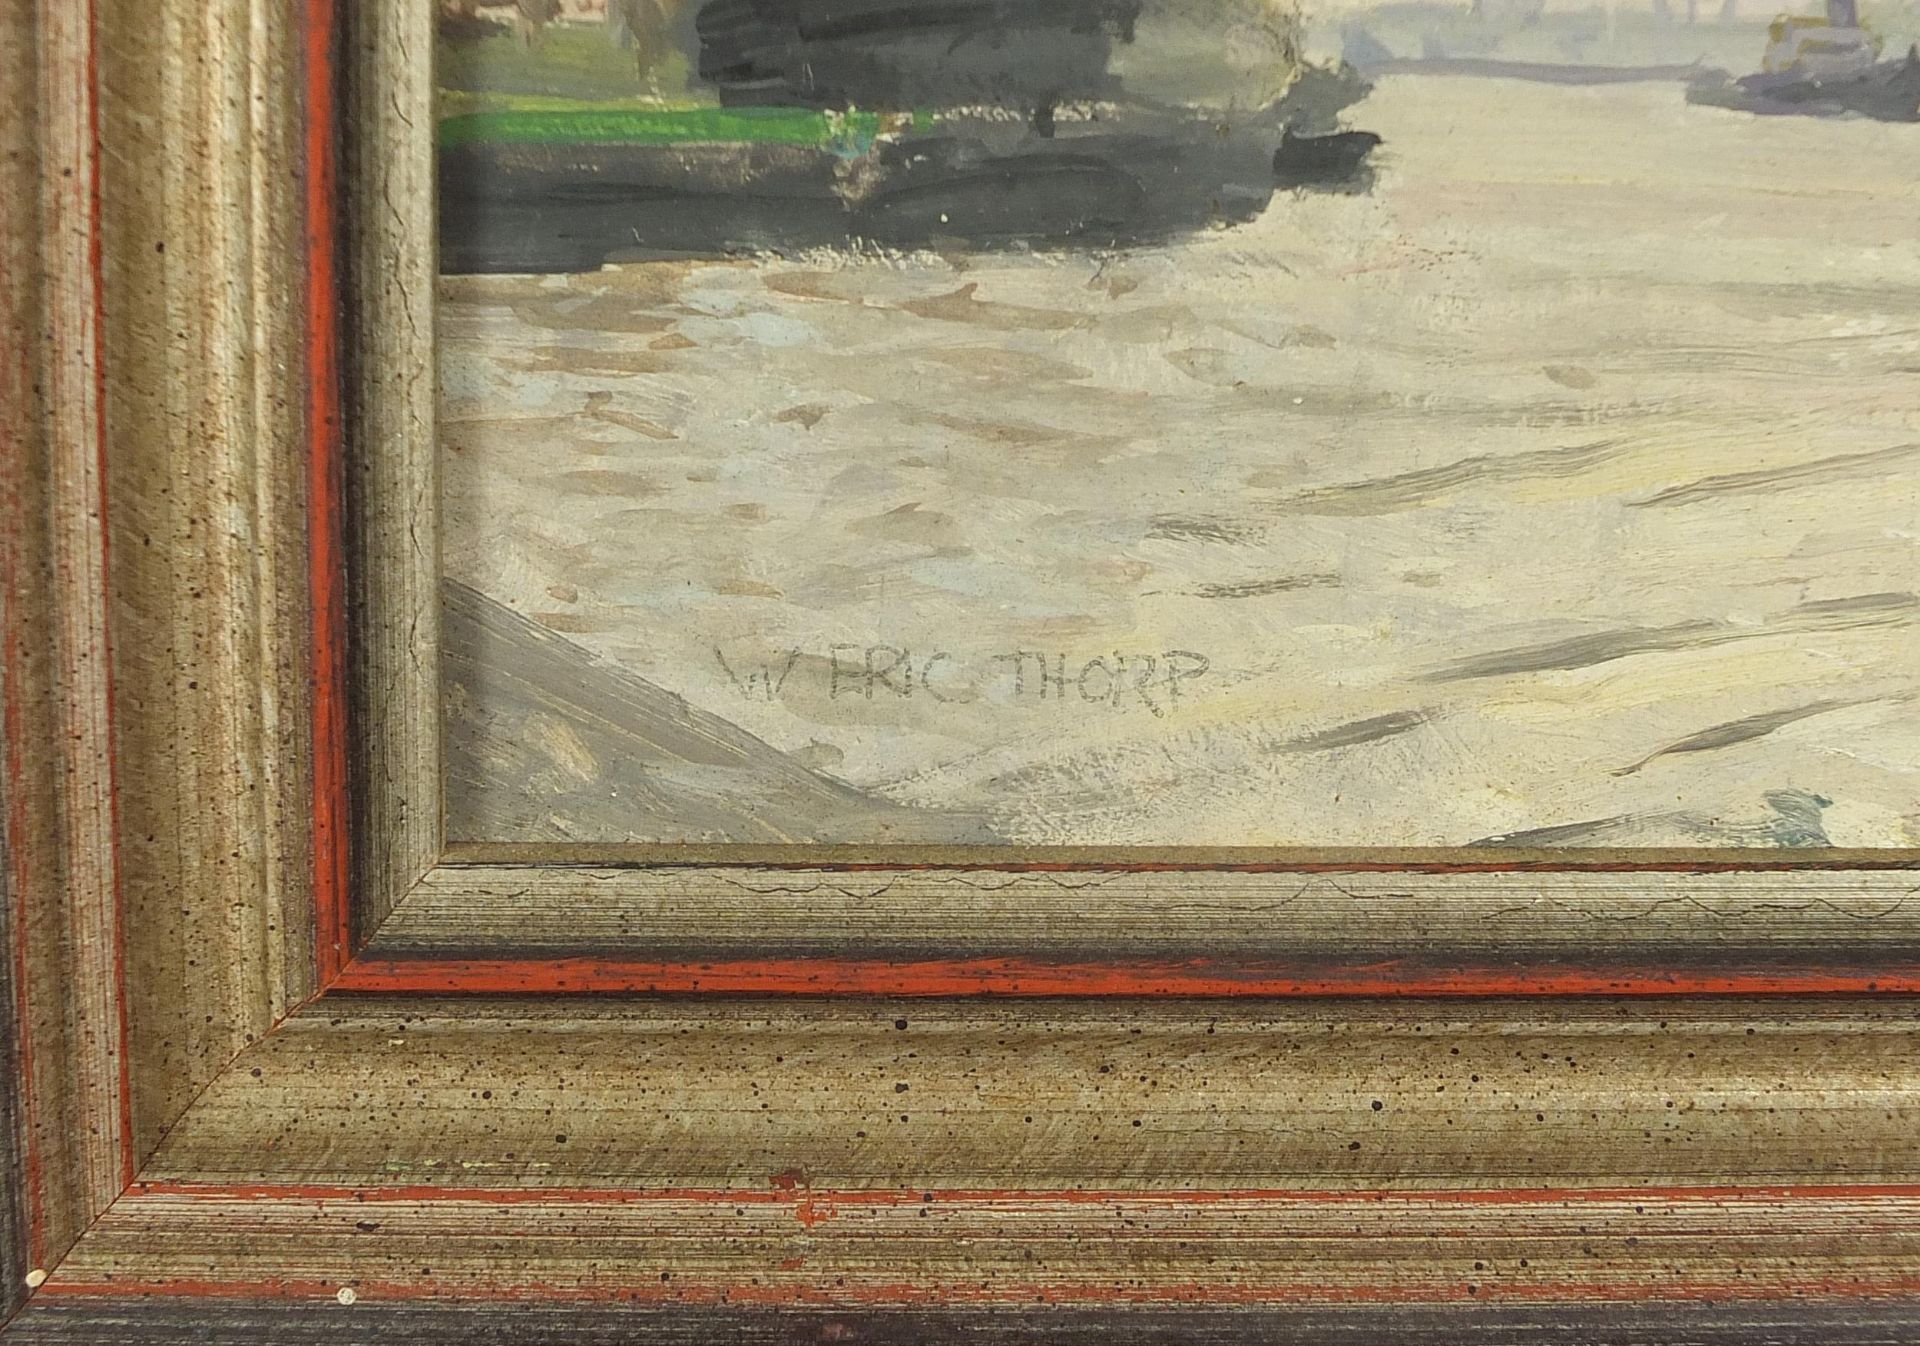 William Eric Thorp - Boats on the River Thames, Modern British oil on board, W Frank Gadsby, - Bild 3 aus 5